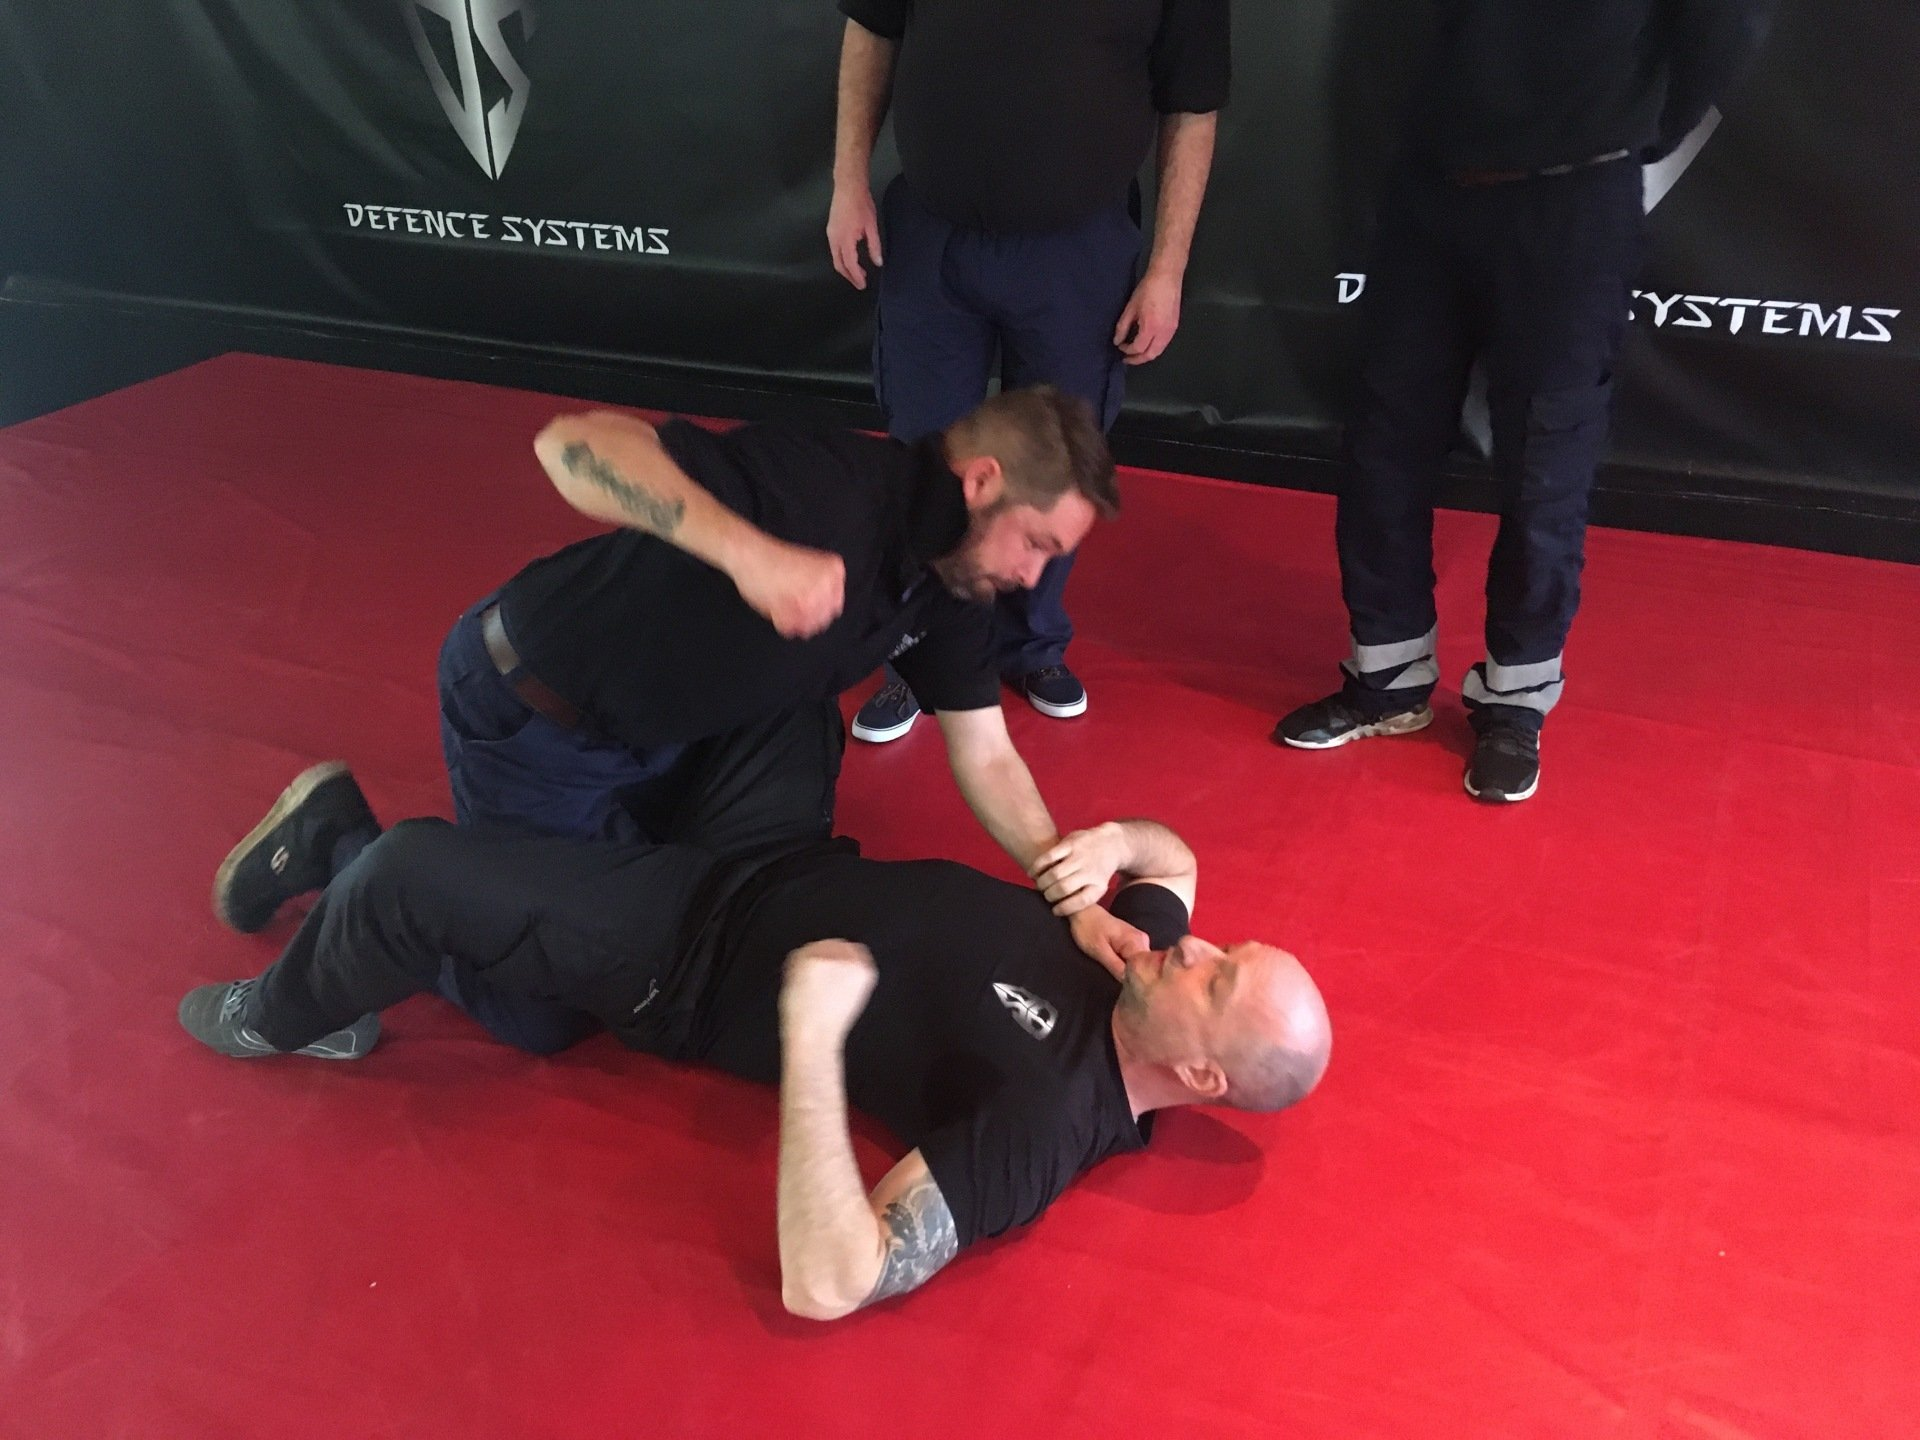 Self defence instruction technique against punching ground threat